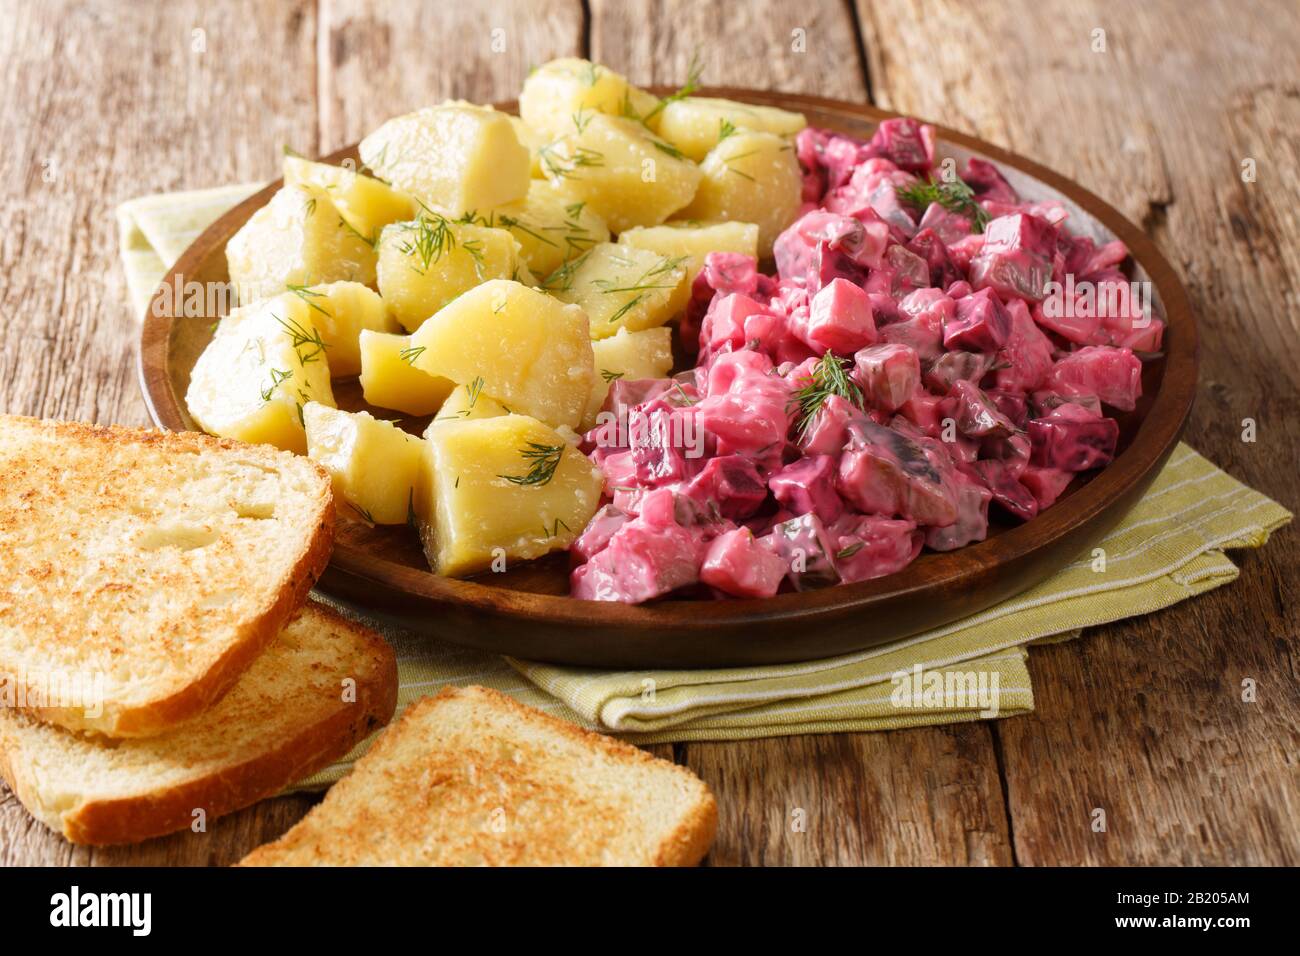 Winter German herring salad with vegetables and a side dish of boiled potatoes close-up in a plate on the table. horizontal Stock Photo